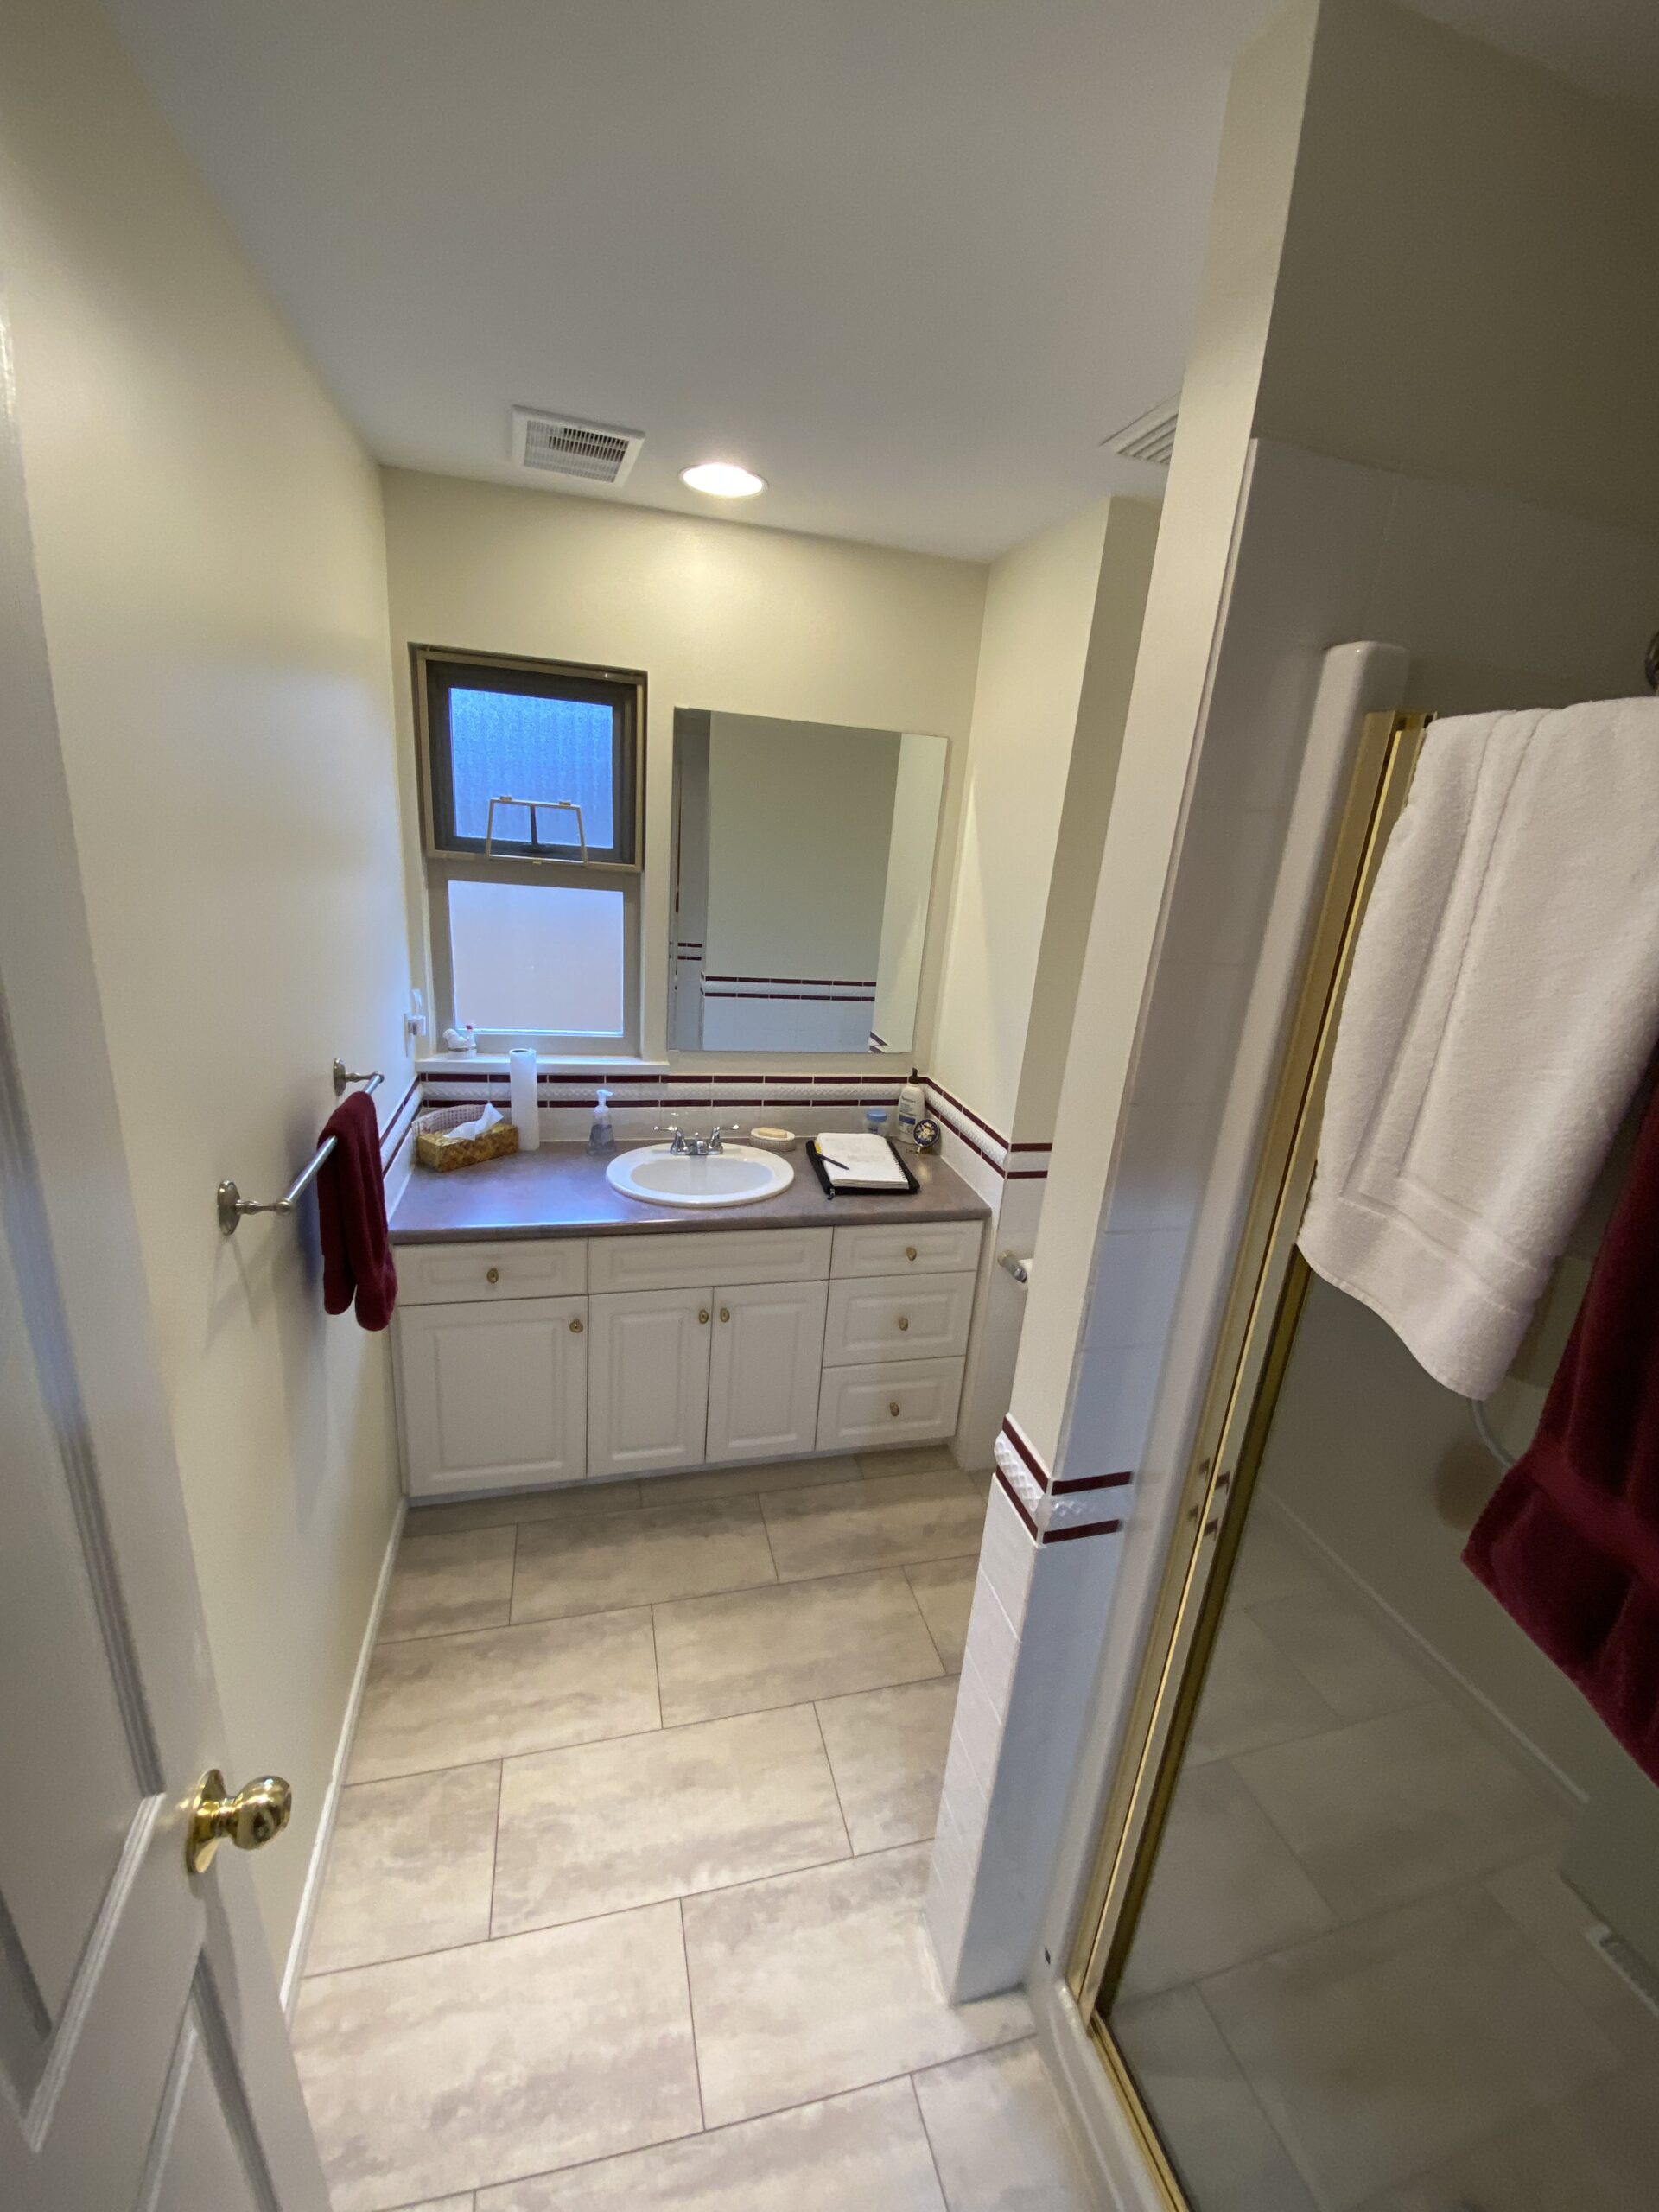 Pre-renovation bathroom with standard fixtures and limited accessibility.